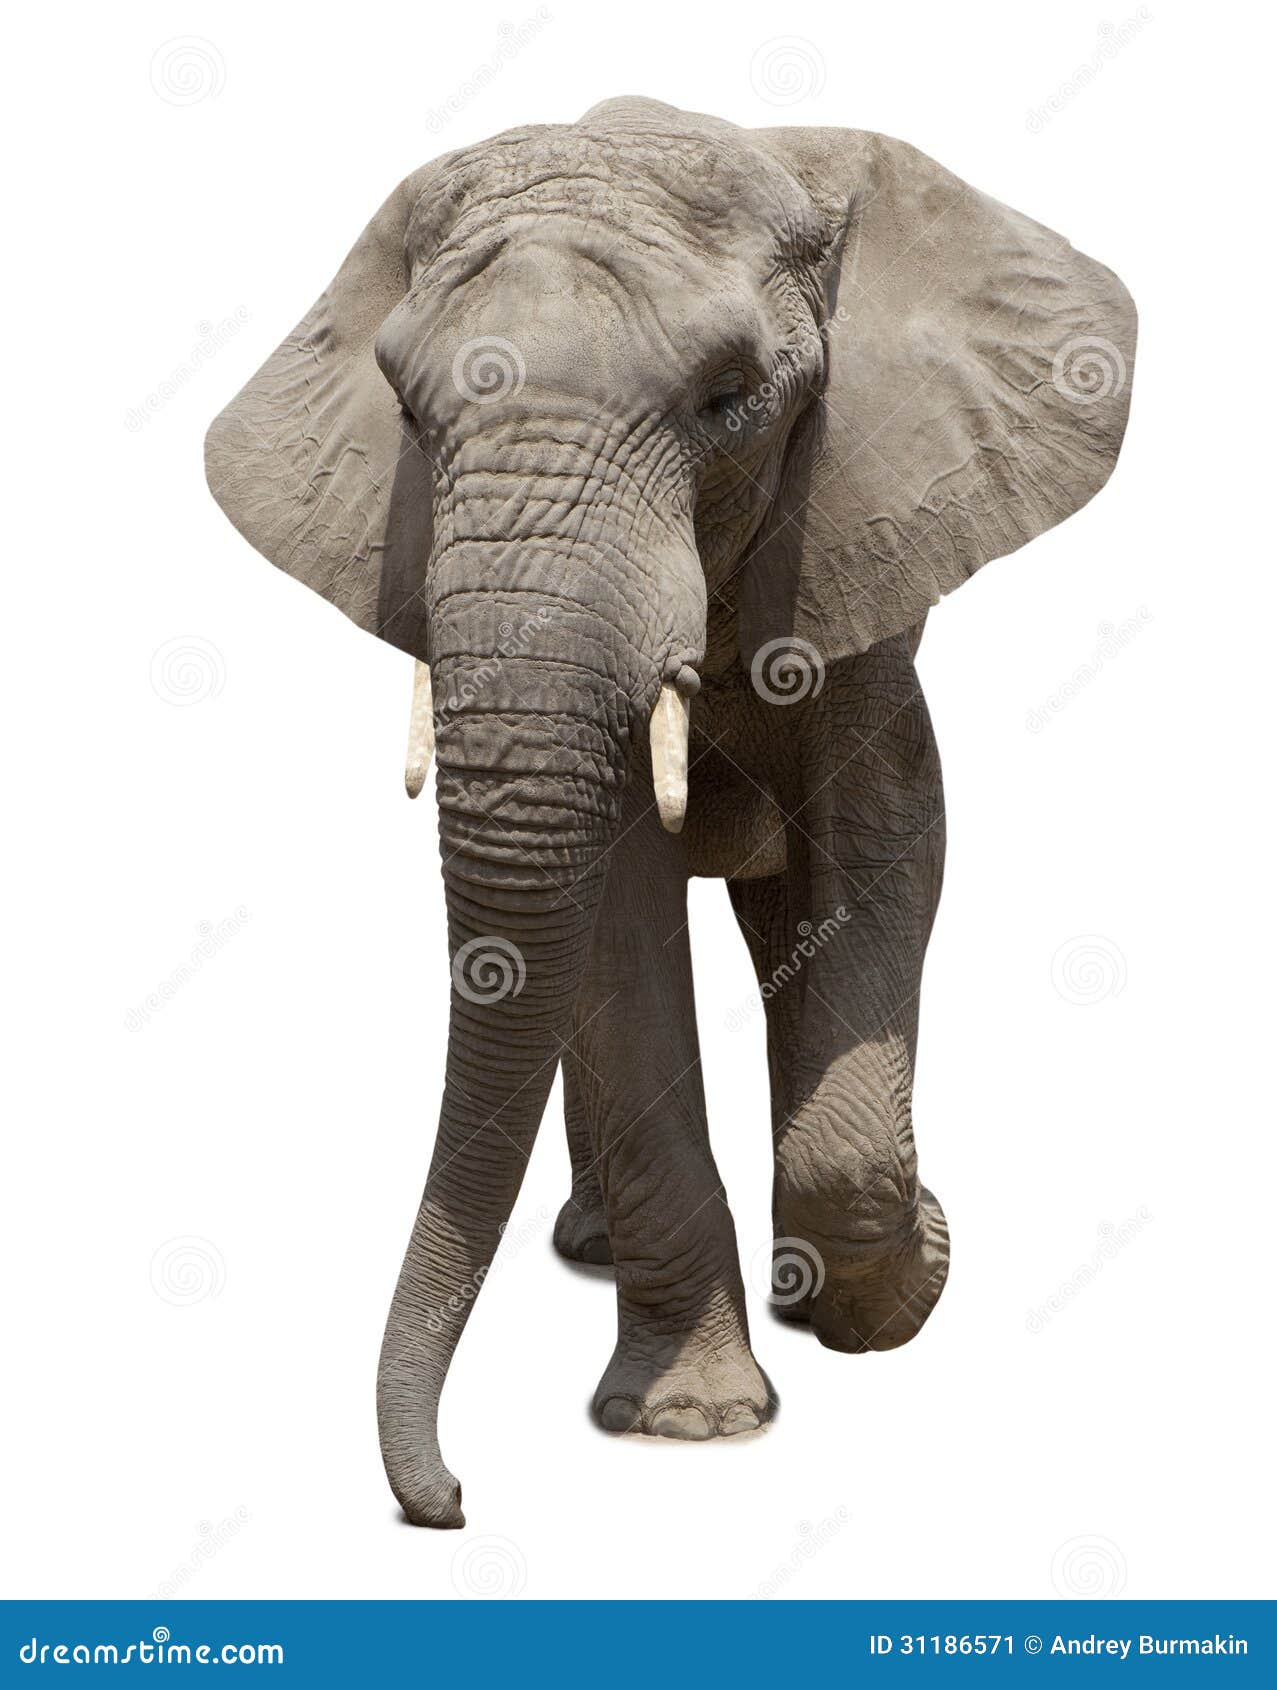 elephant clipart front view - photo #28